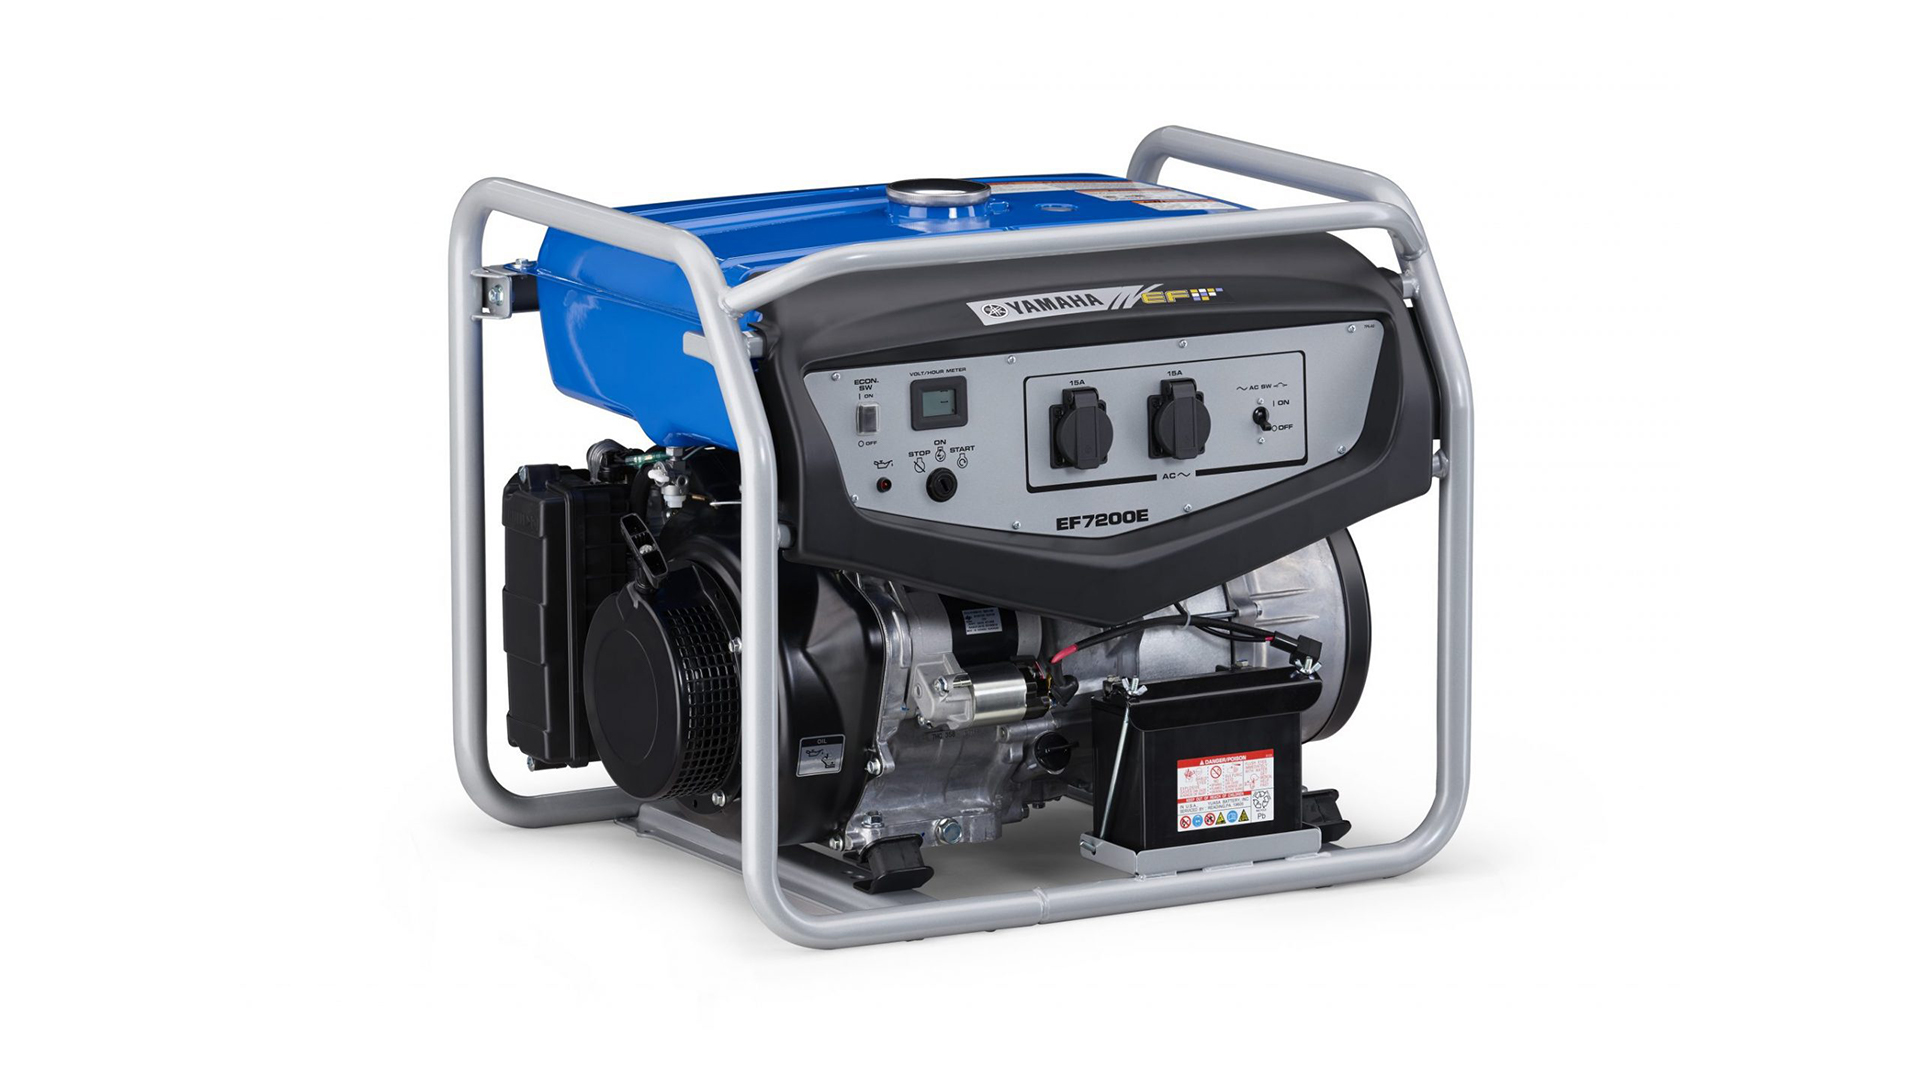 YAMAHA EF7200E GENERATOR  - FUEL ECONOMY:
The powerful EF7200E is more than capable of handling power requirements to run a small fridge, T.V, lights and so much more.